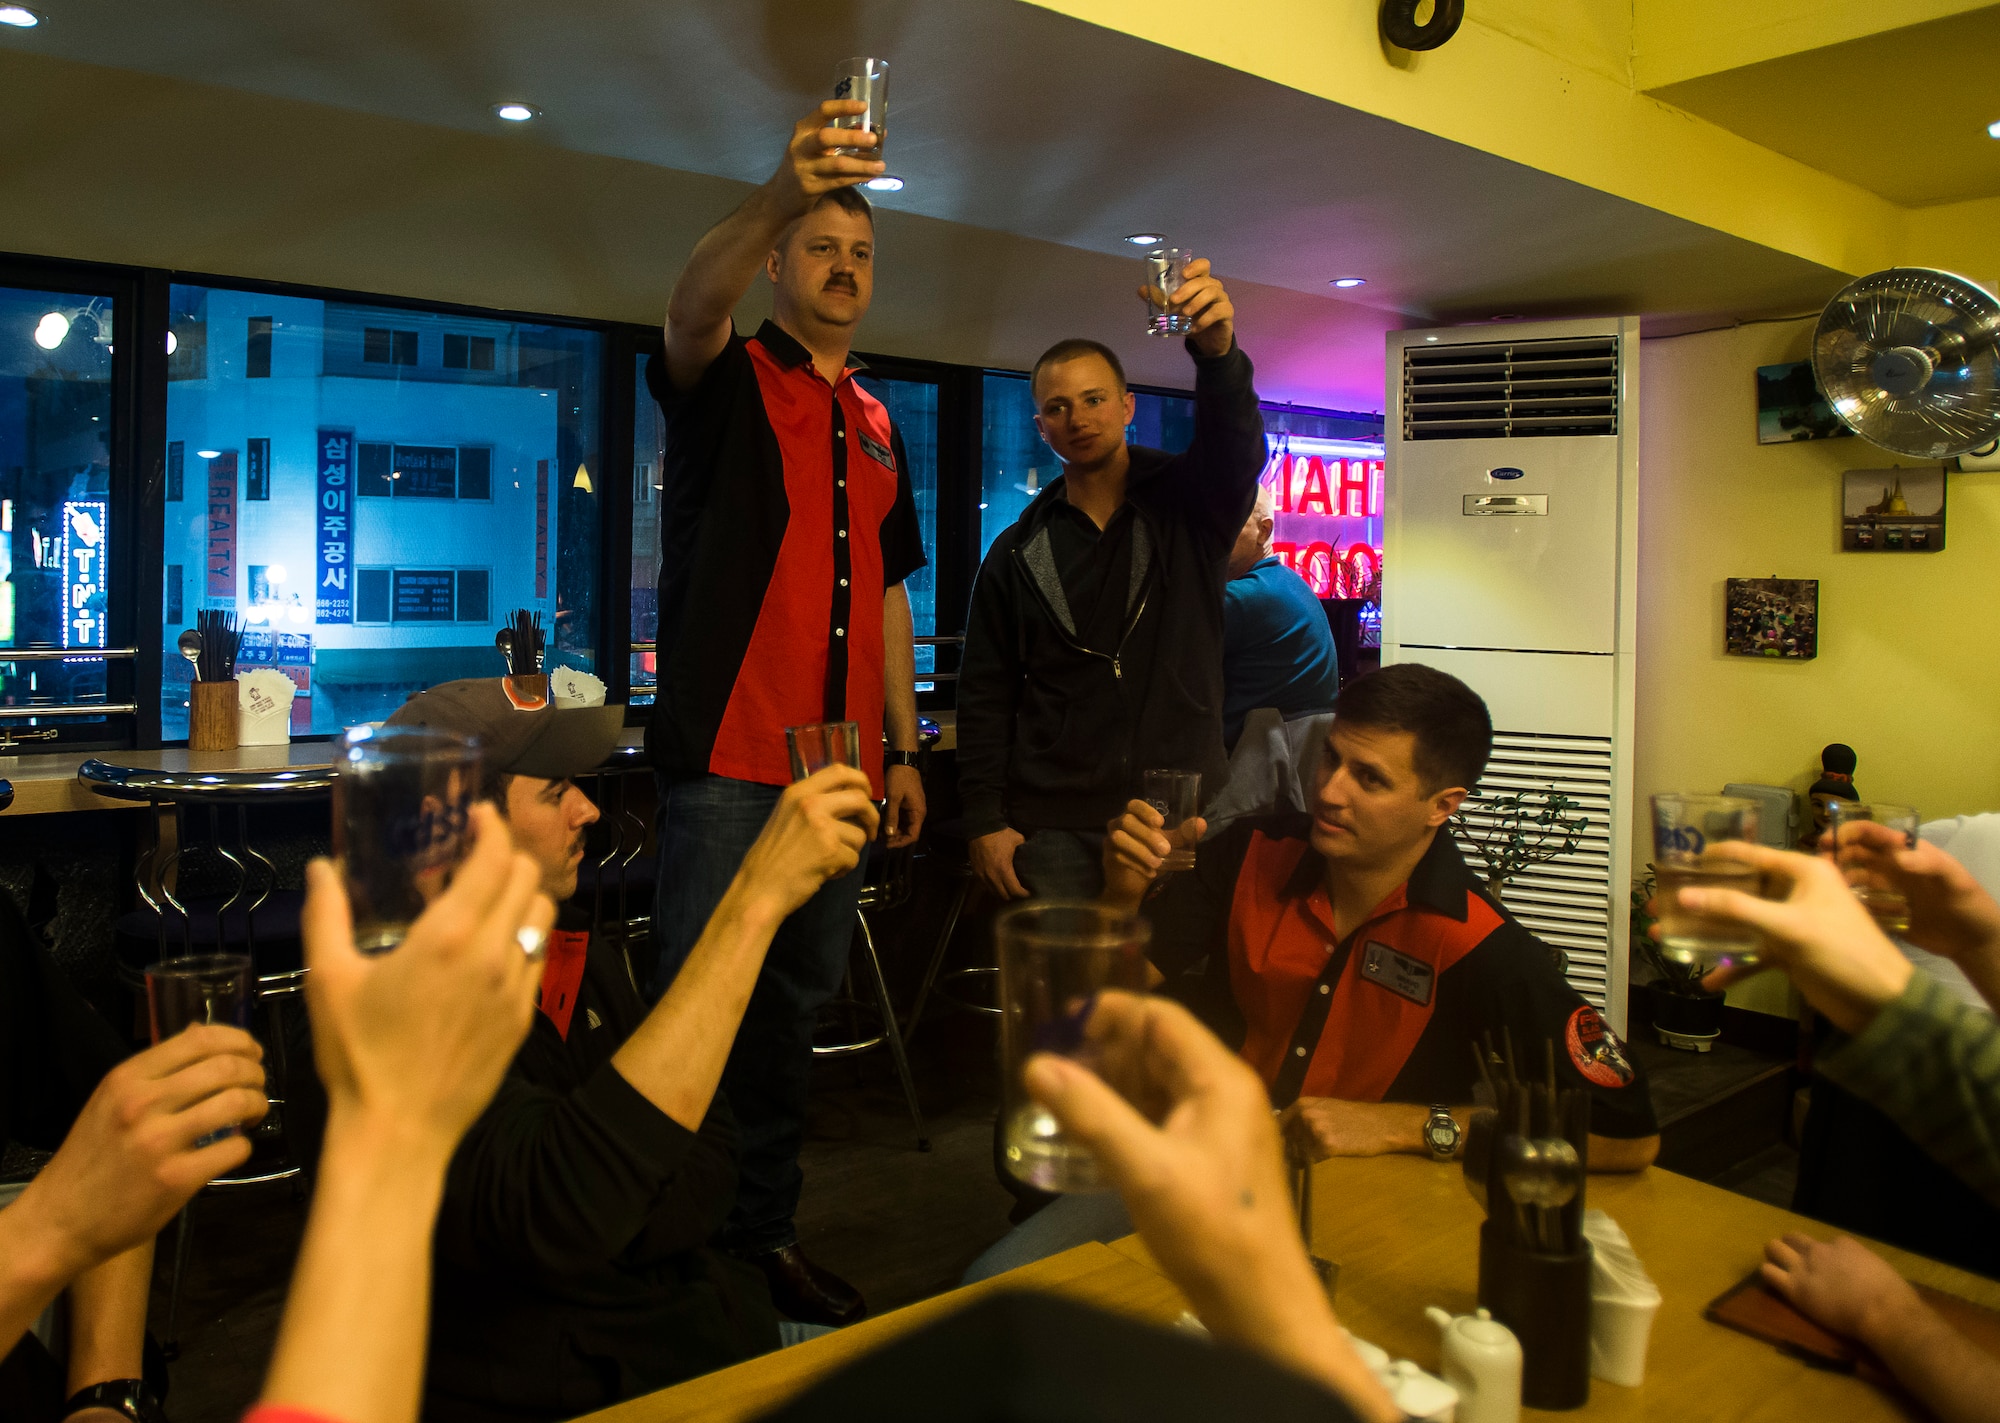 Lt. Col. David Shoemaker, Marine Corps Cpl. Jake Balcom and other members of the 421st Fighter Squadron raise their glasses in a toast to Col. Ralph Balcom, a fallen Vietnam War 421st FS pilot, March 26, 2014, in Pyeongtaek, Republic of Korea. Shoemaker and the 421st toast to Ralph Balcom's name every six weeks as an appreciation for their heritage and a reminder of the families effected by sacrifice.Shoemaker is the 421st Fighter Squadron commander. (U.S. Air Force photo/Staff Sgt. Jake Barreiro)